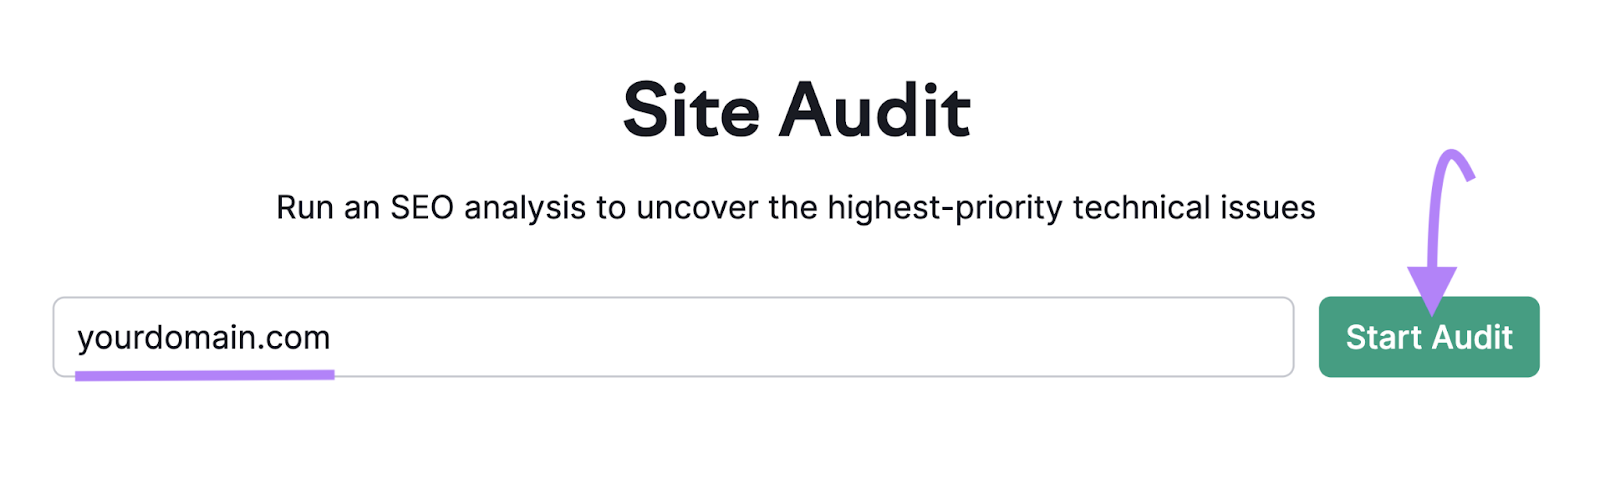 Site Audit search for a domain